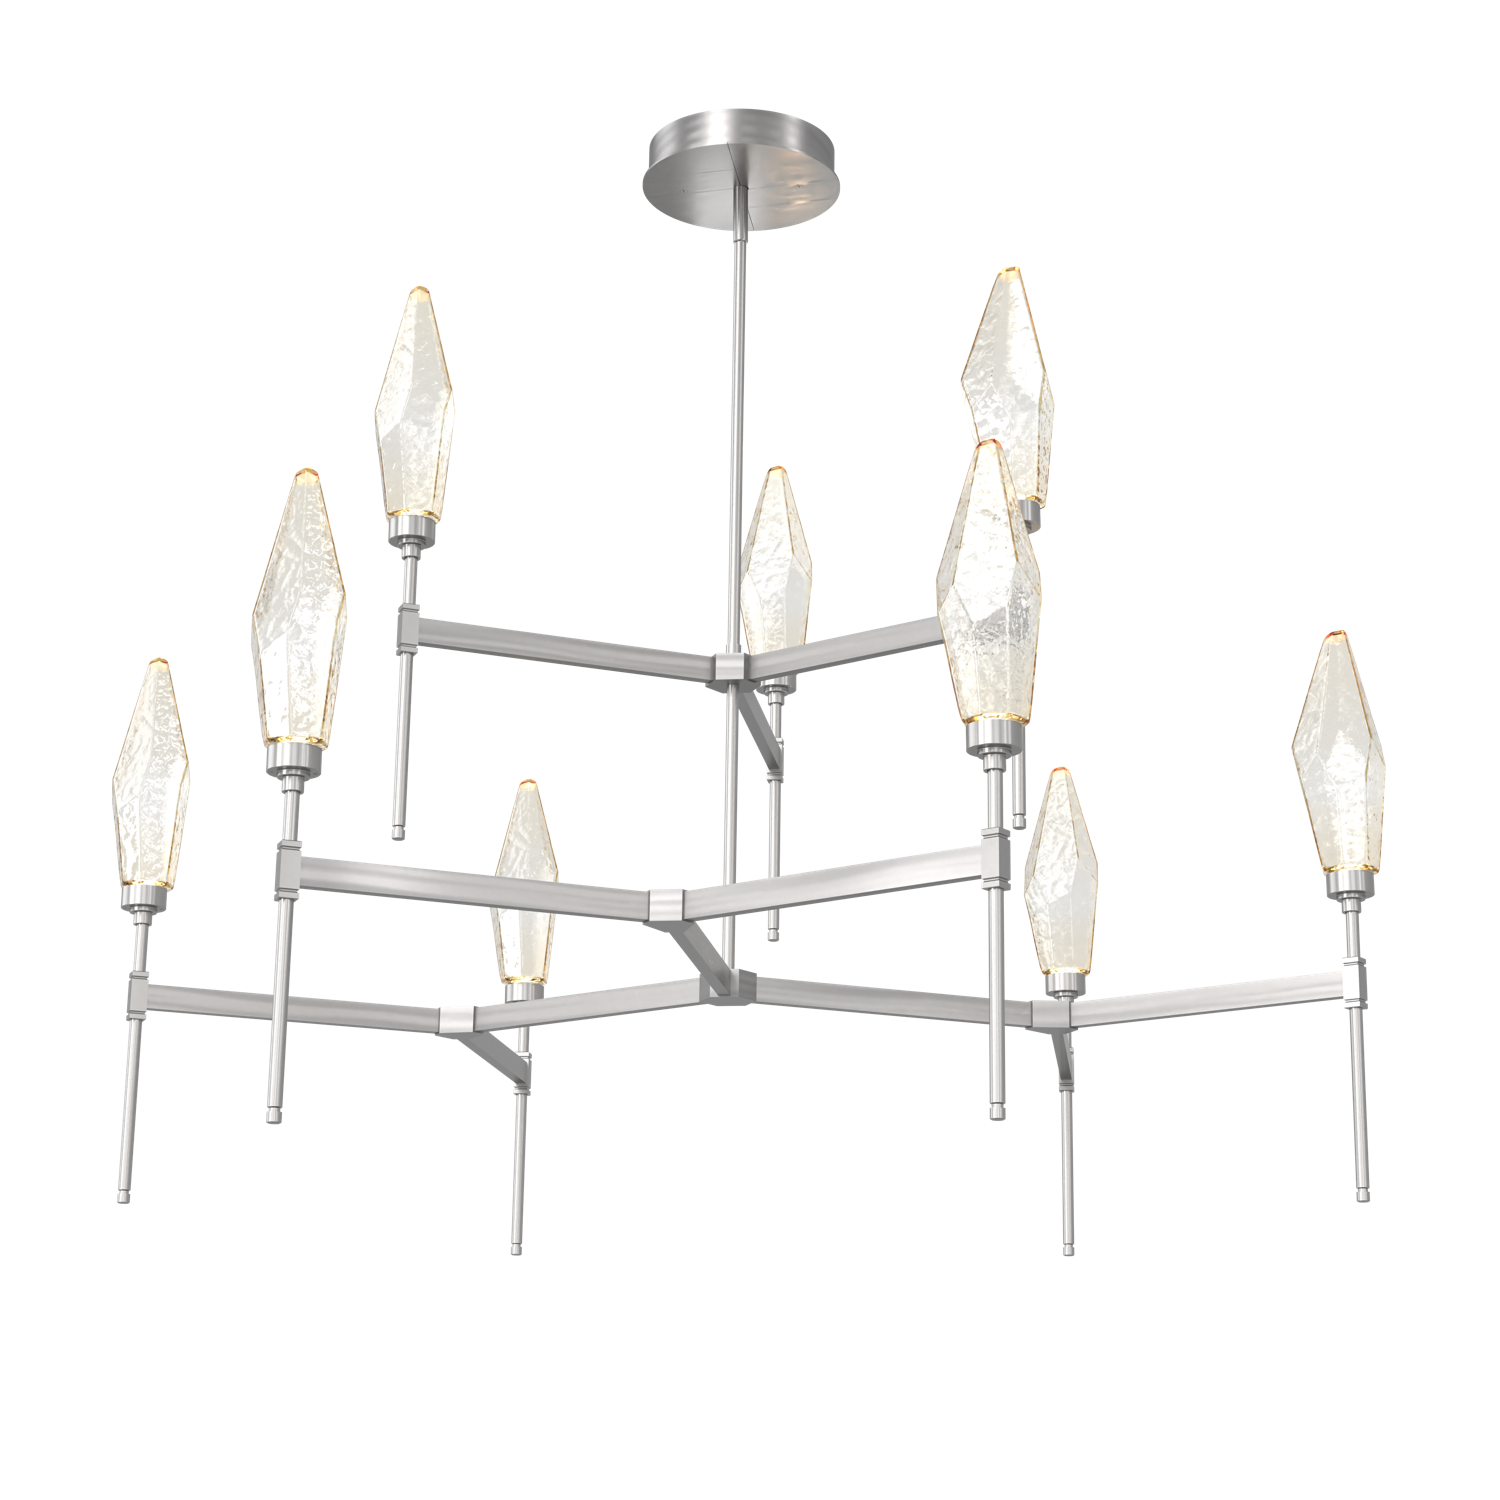 CHB0050-54-SN-CA-Hammerton-Studio-Rock-Crystal-54-inch-round-two-tier-belvedere-chandelier-with-satin-nickel-finish-and-chilled-amber-blown-glass-shades-and-LED-lamping